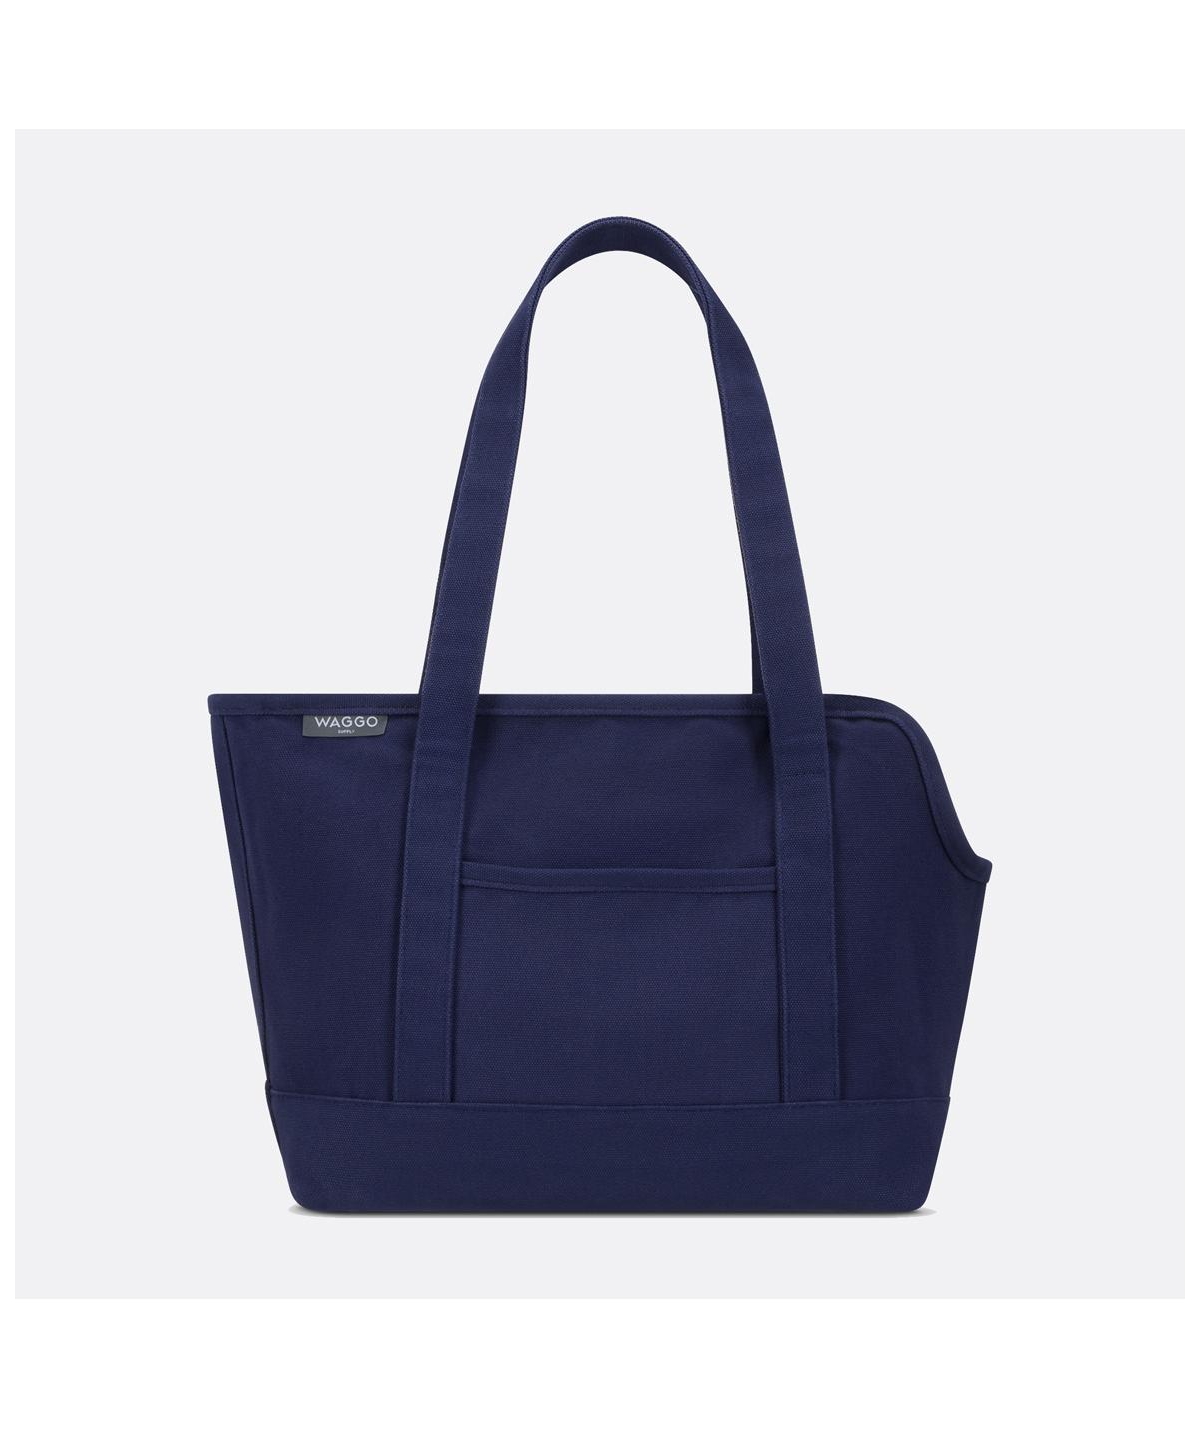 Canvas Dog Bag Carrier Tote - Navy - Navy